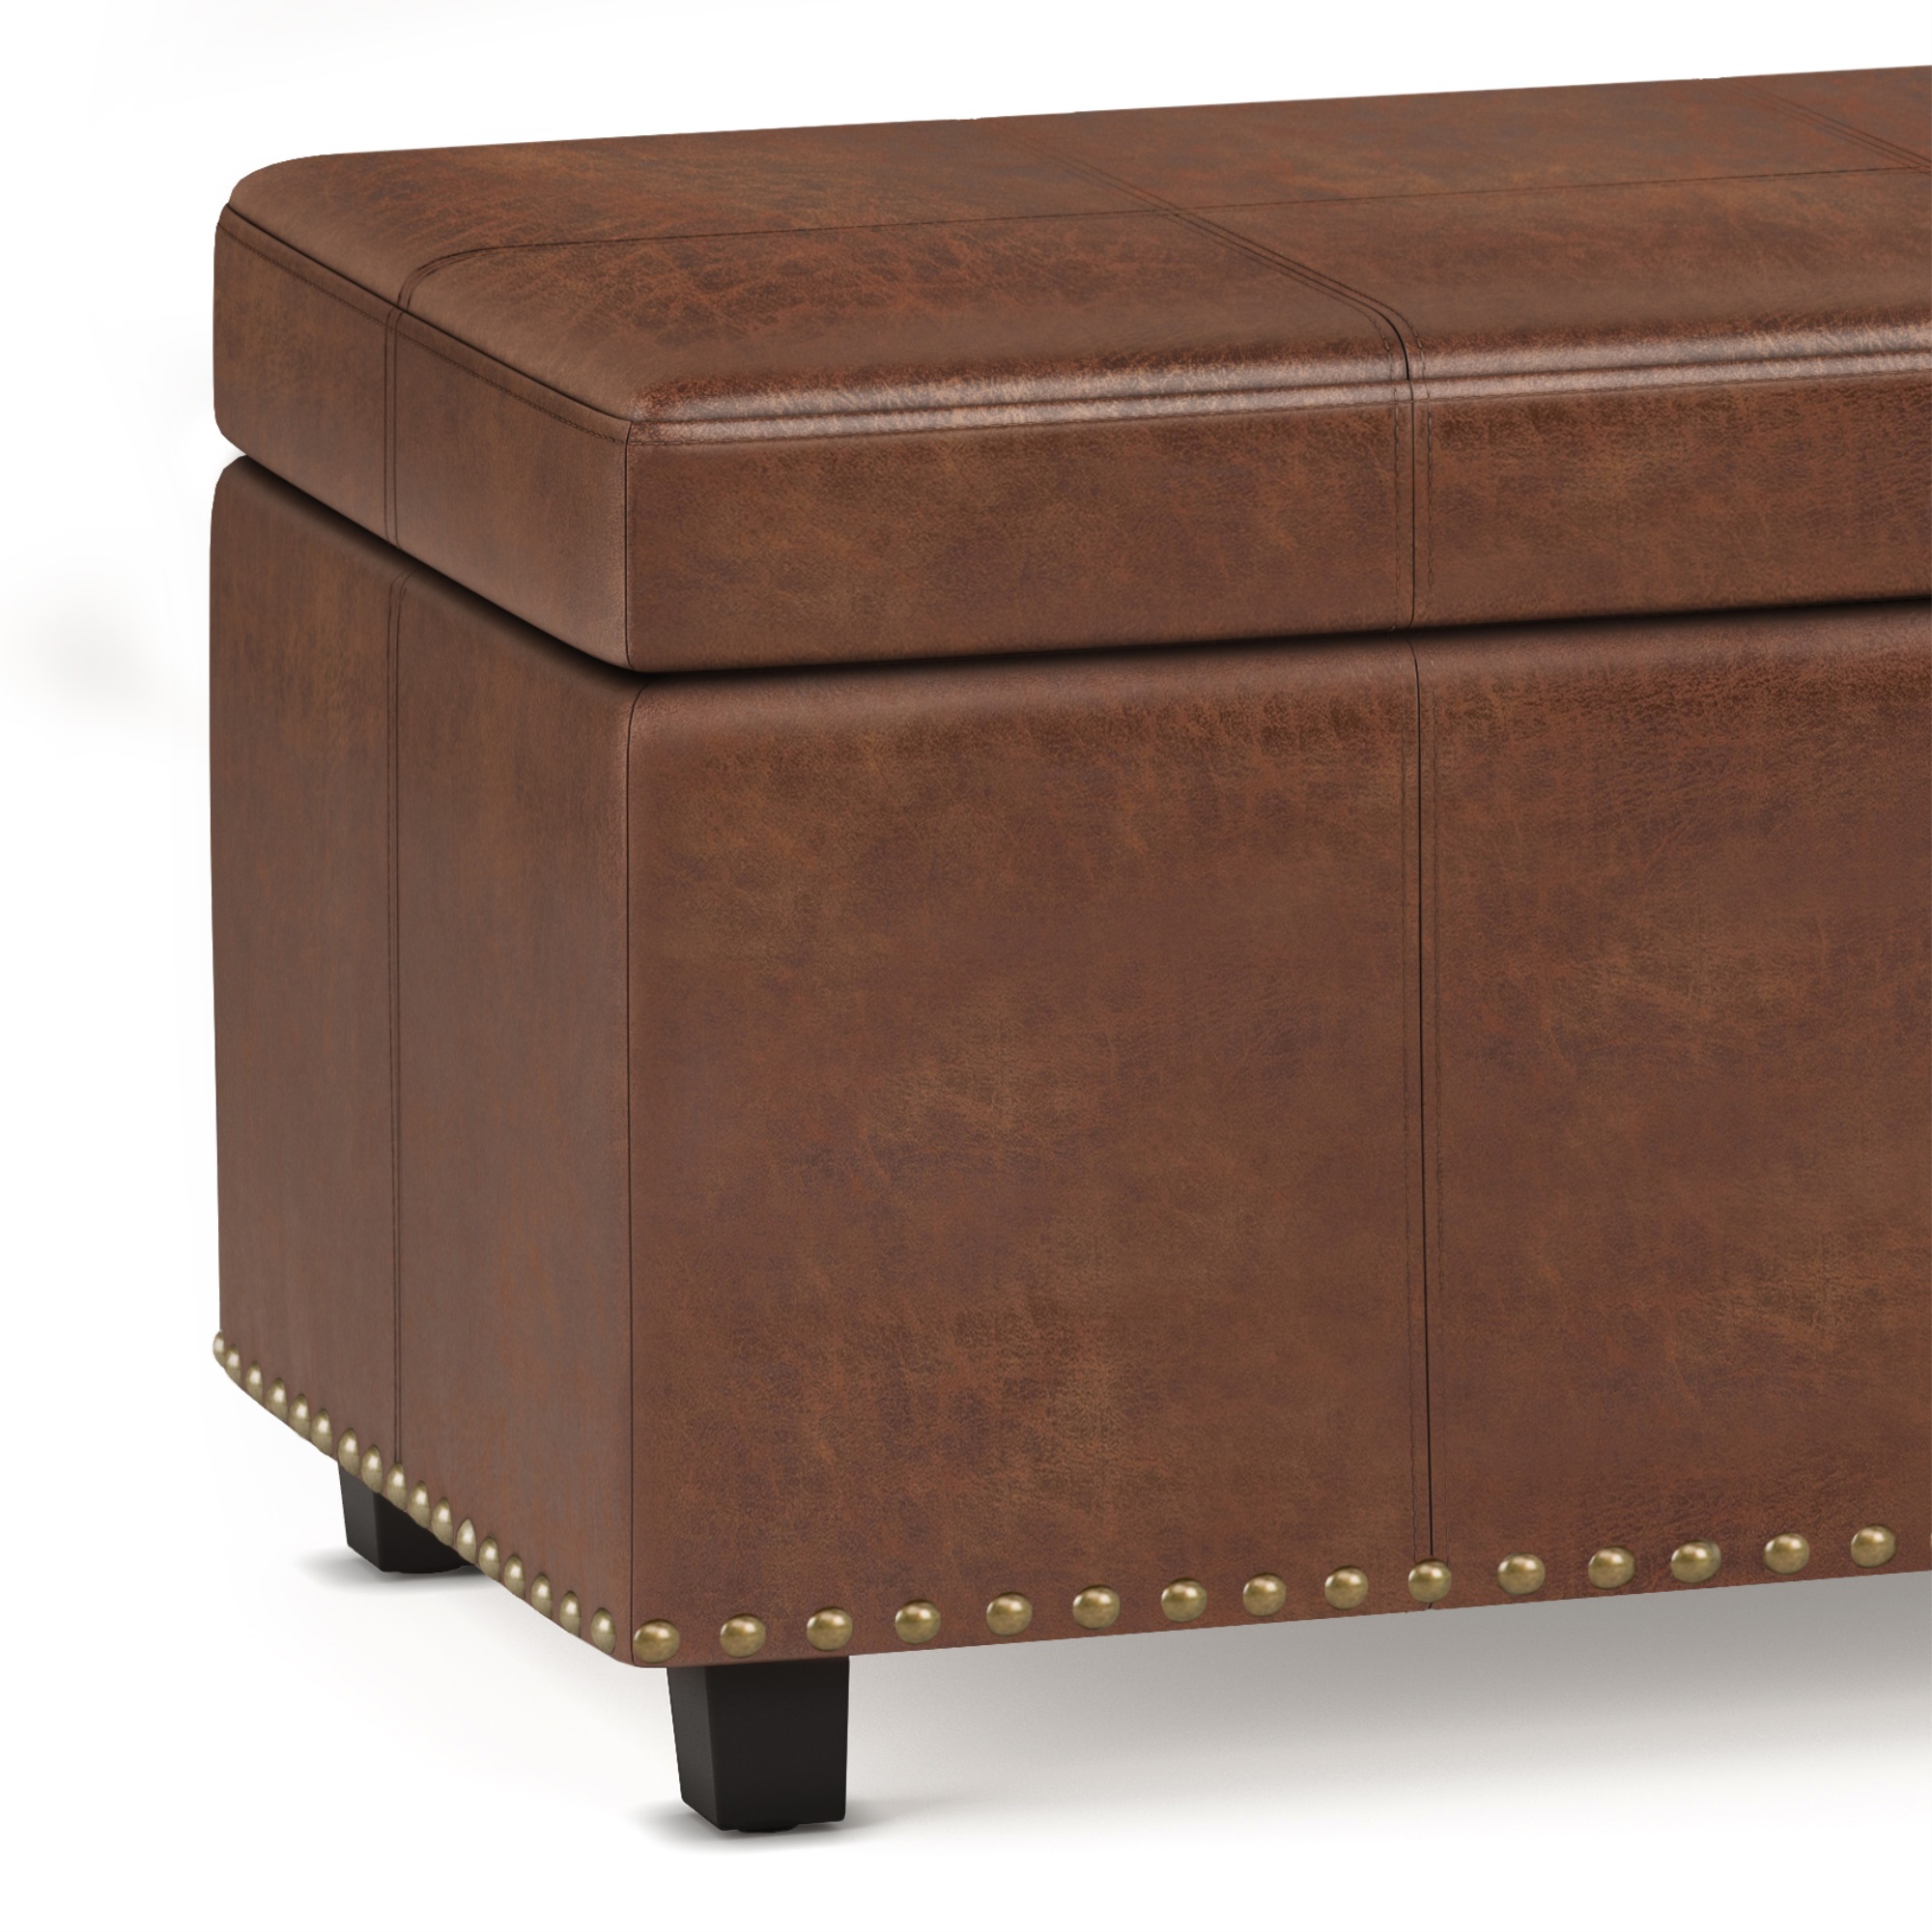 Kingsley Large Storage Ottoman, Distressed Leather Ottoman With Storage